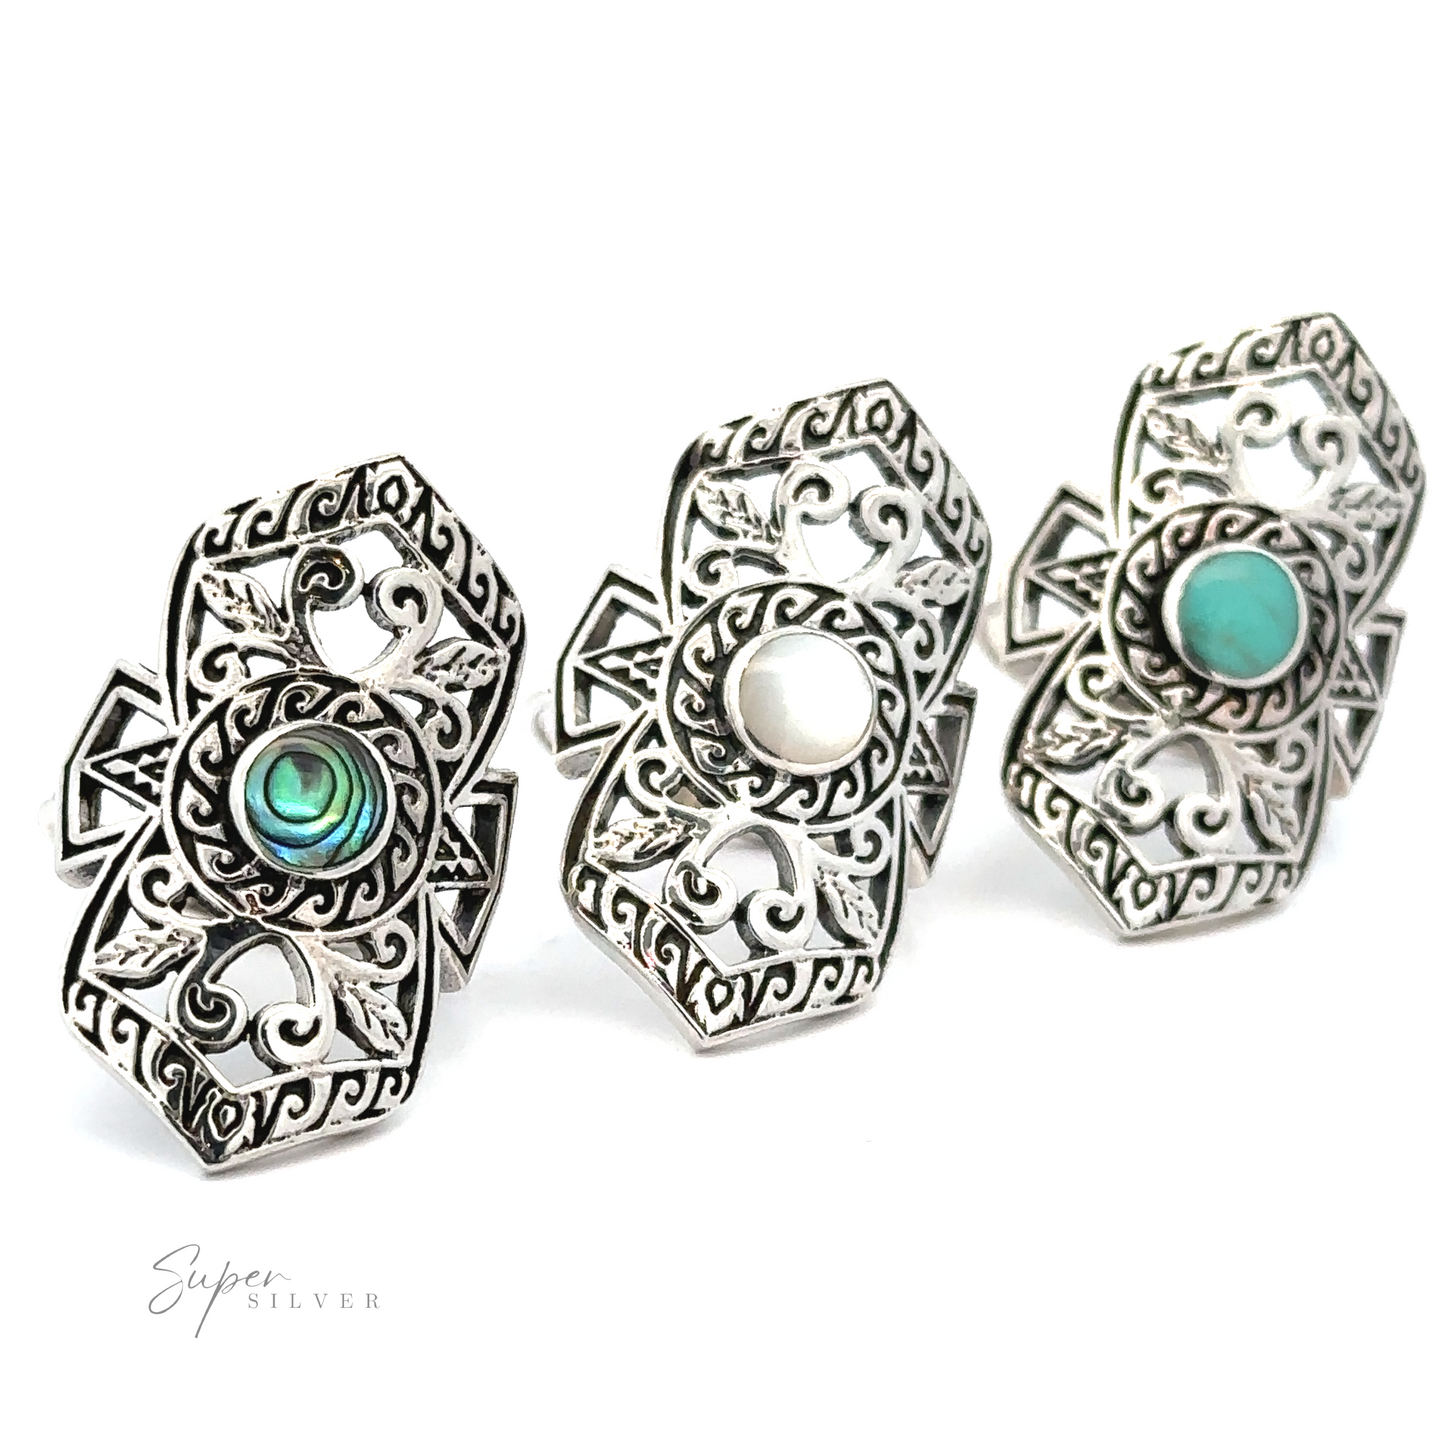 Three elaborate filigree shield rings with turquoise stone accents and pearls.